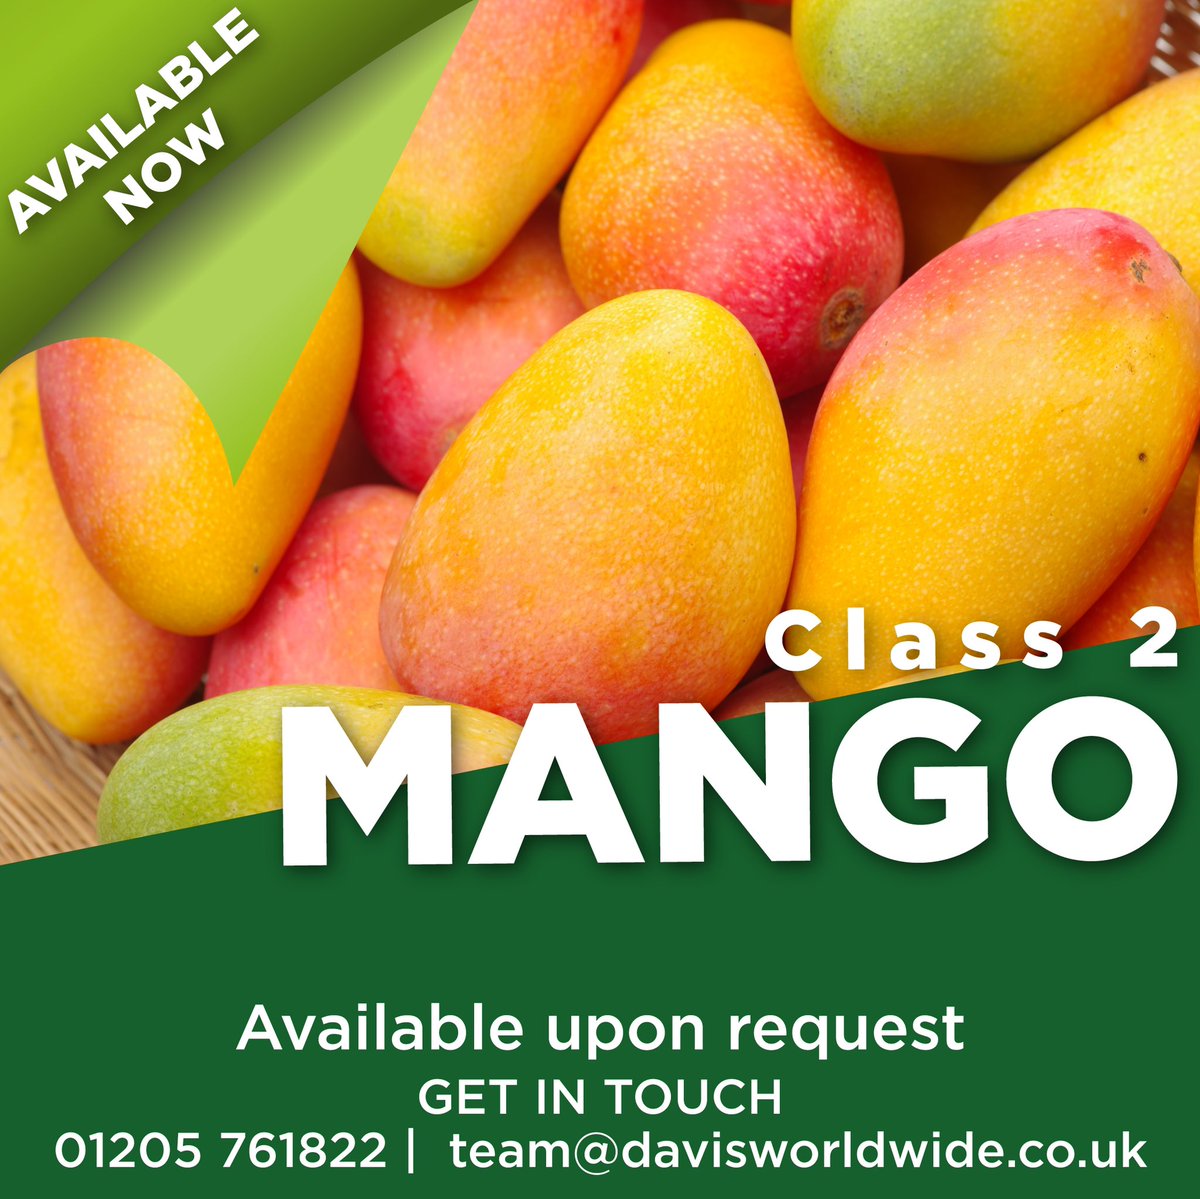 Class 2 Mangoes, great tasting, delicious, juicy & full of flavour. Available Now. 

Call 01205 761822 or email team@davisworldwide.co.uk

Only the best fresh seasonal produce from @davis_worldwide

#freshmango #mangoes #mango #fruit #fruits #freshfruit #5aday #snack #wholesaler